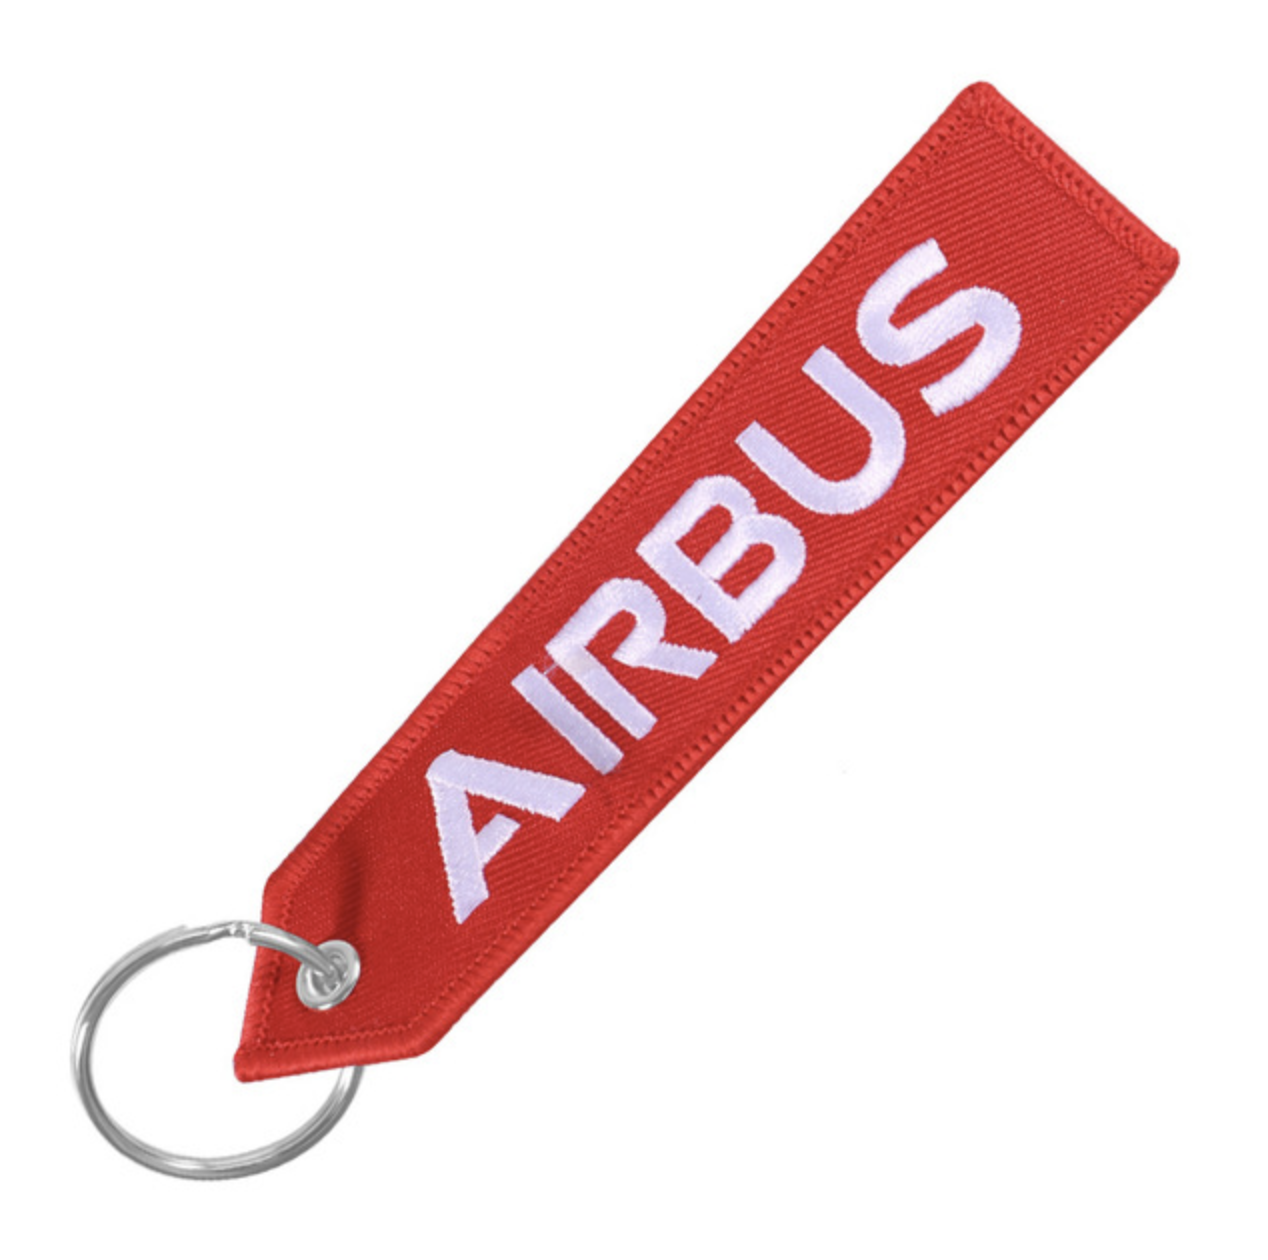 Airbus (Red) Designed Key Chains